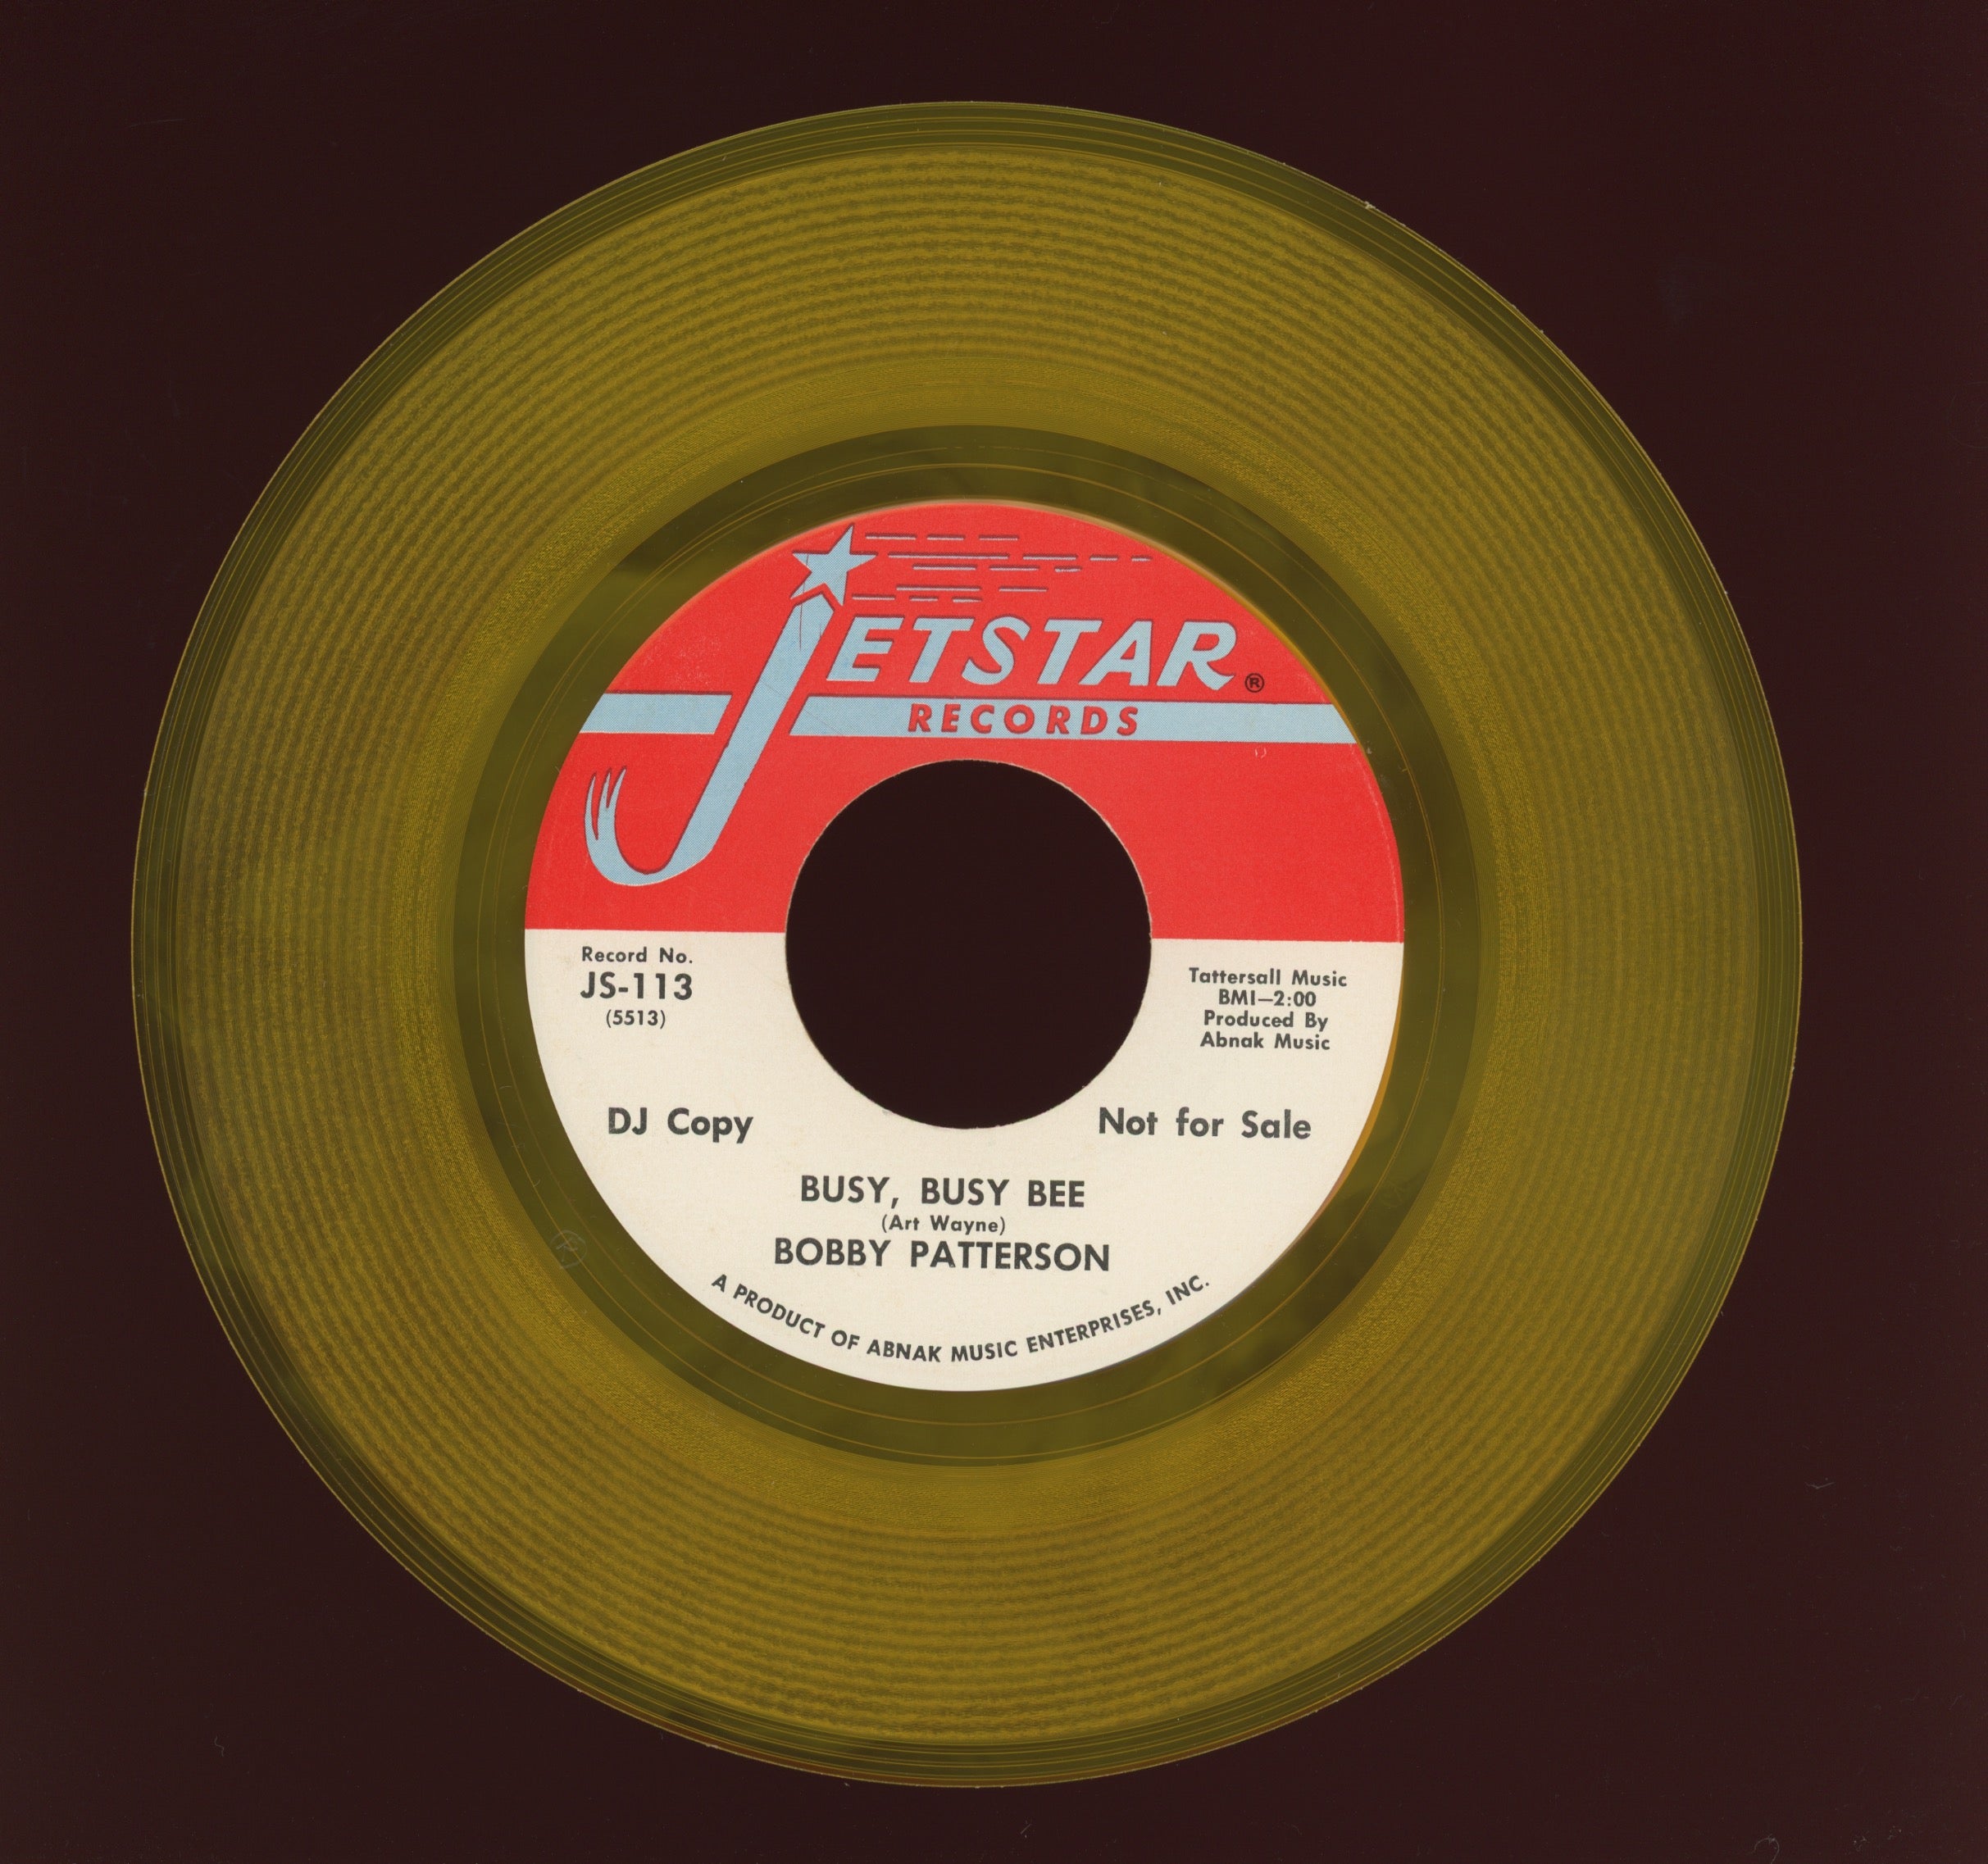 Bobby Patterson - Busy Busy Bee on Jetstar Yellow Vinyl Promo